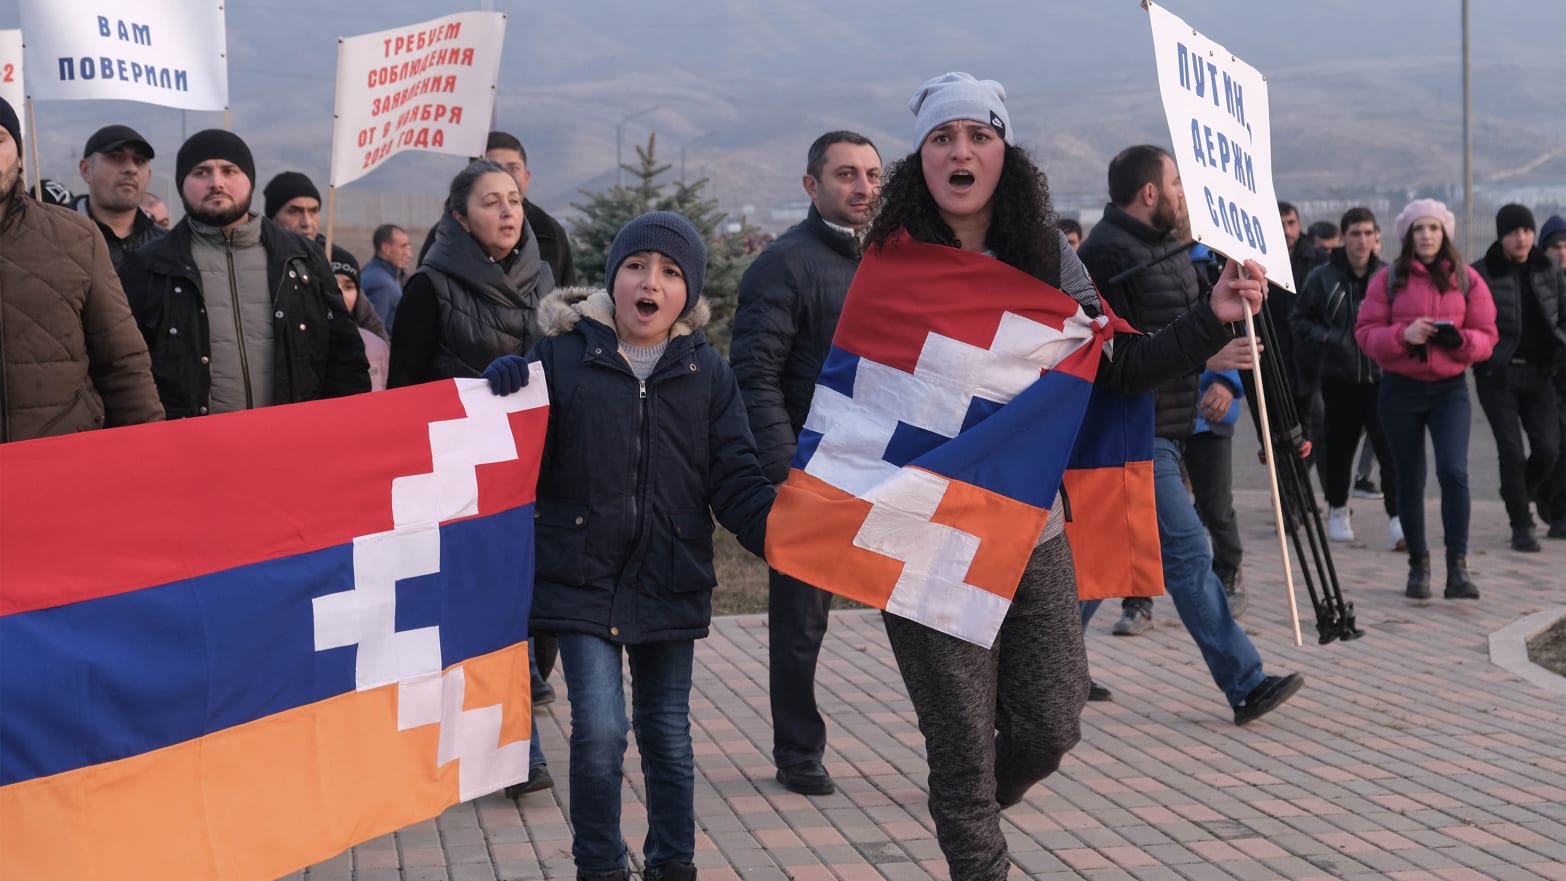 Armenia moves to restrict internet